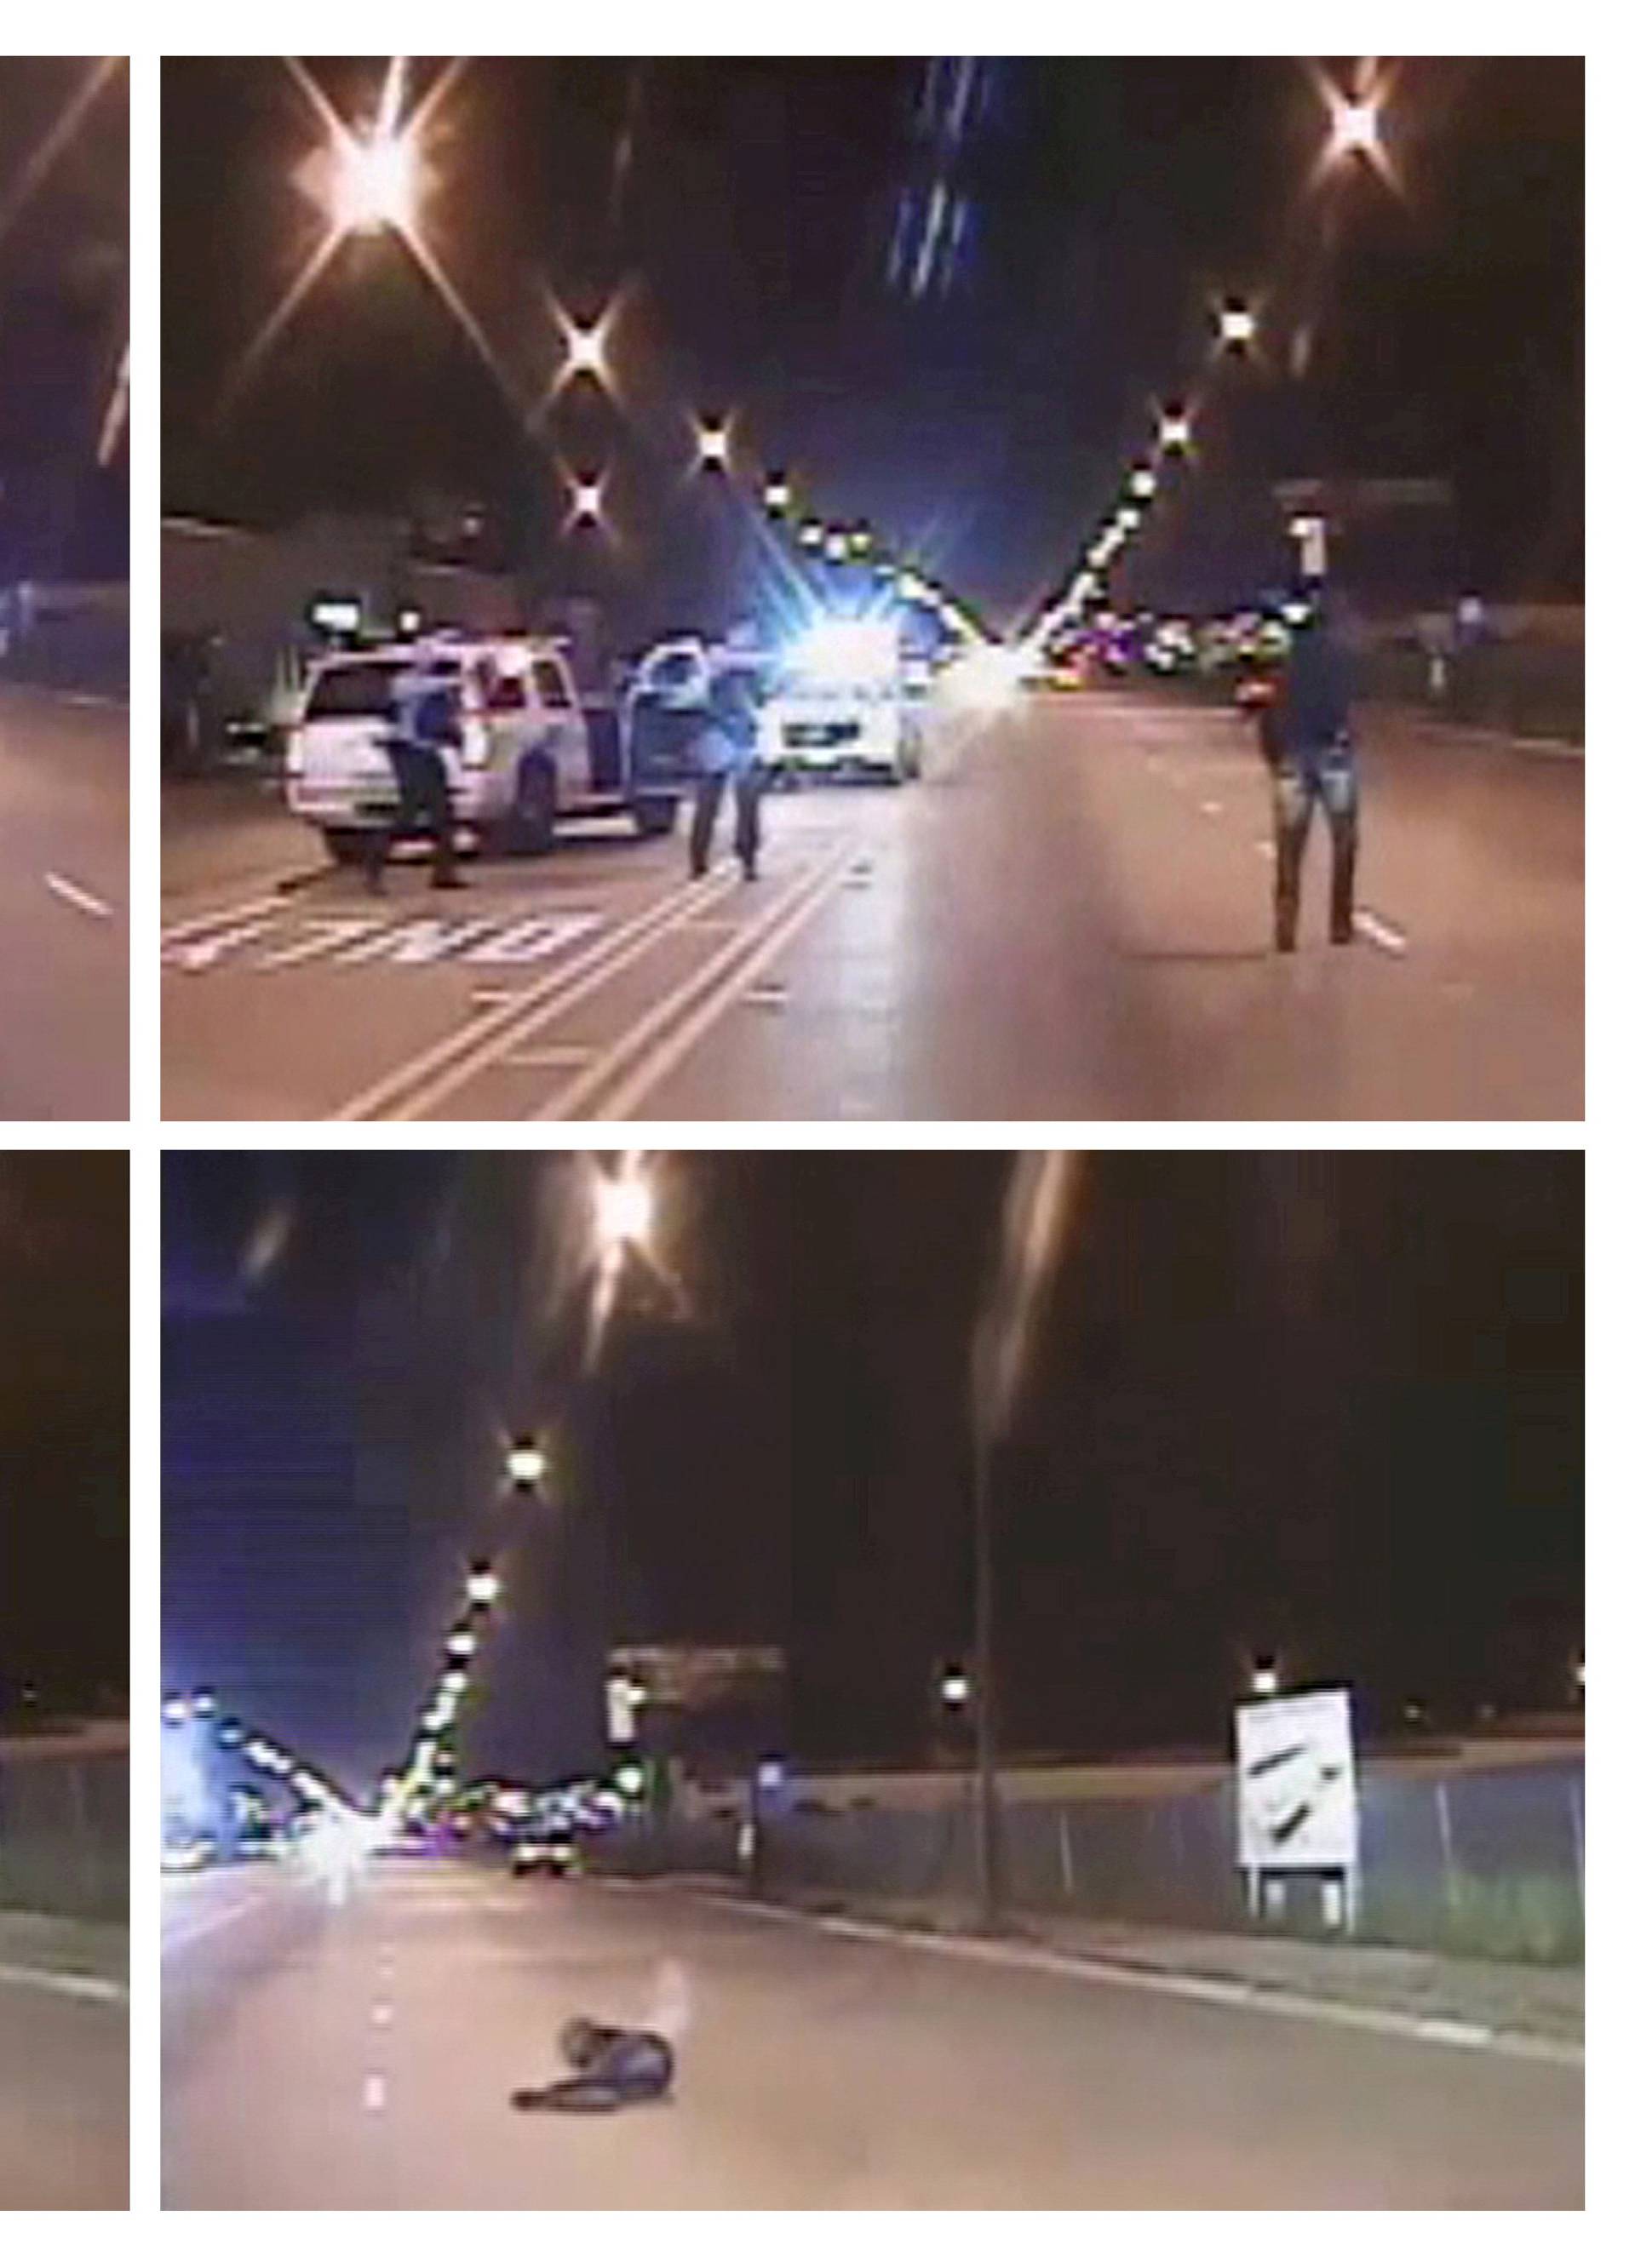 FILE PHOTO: Combination of still images from video released by Chicago Police show McDonald walking and subsequently shot in Chicago